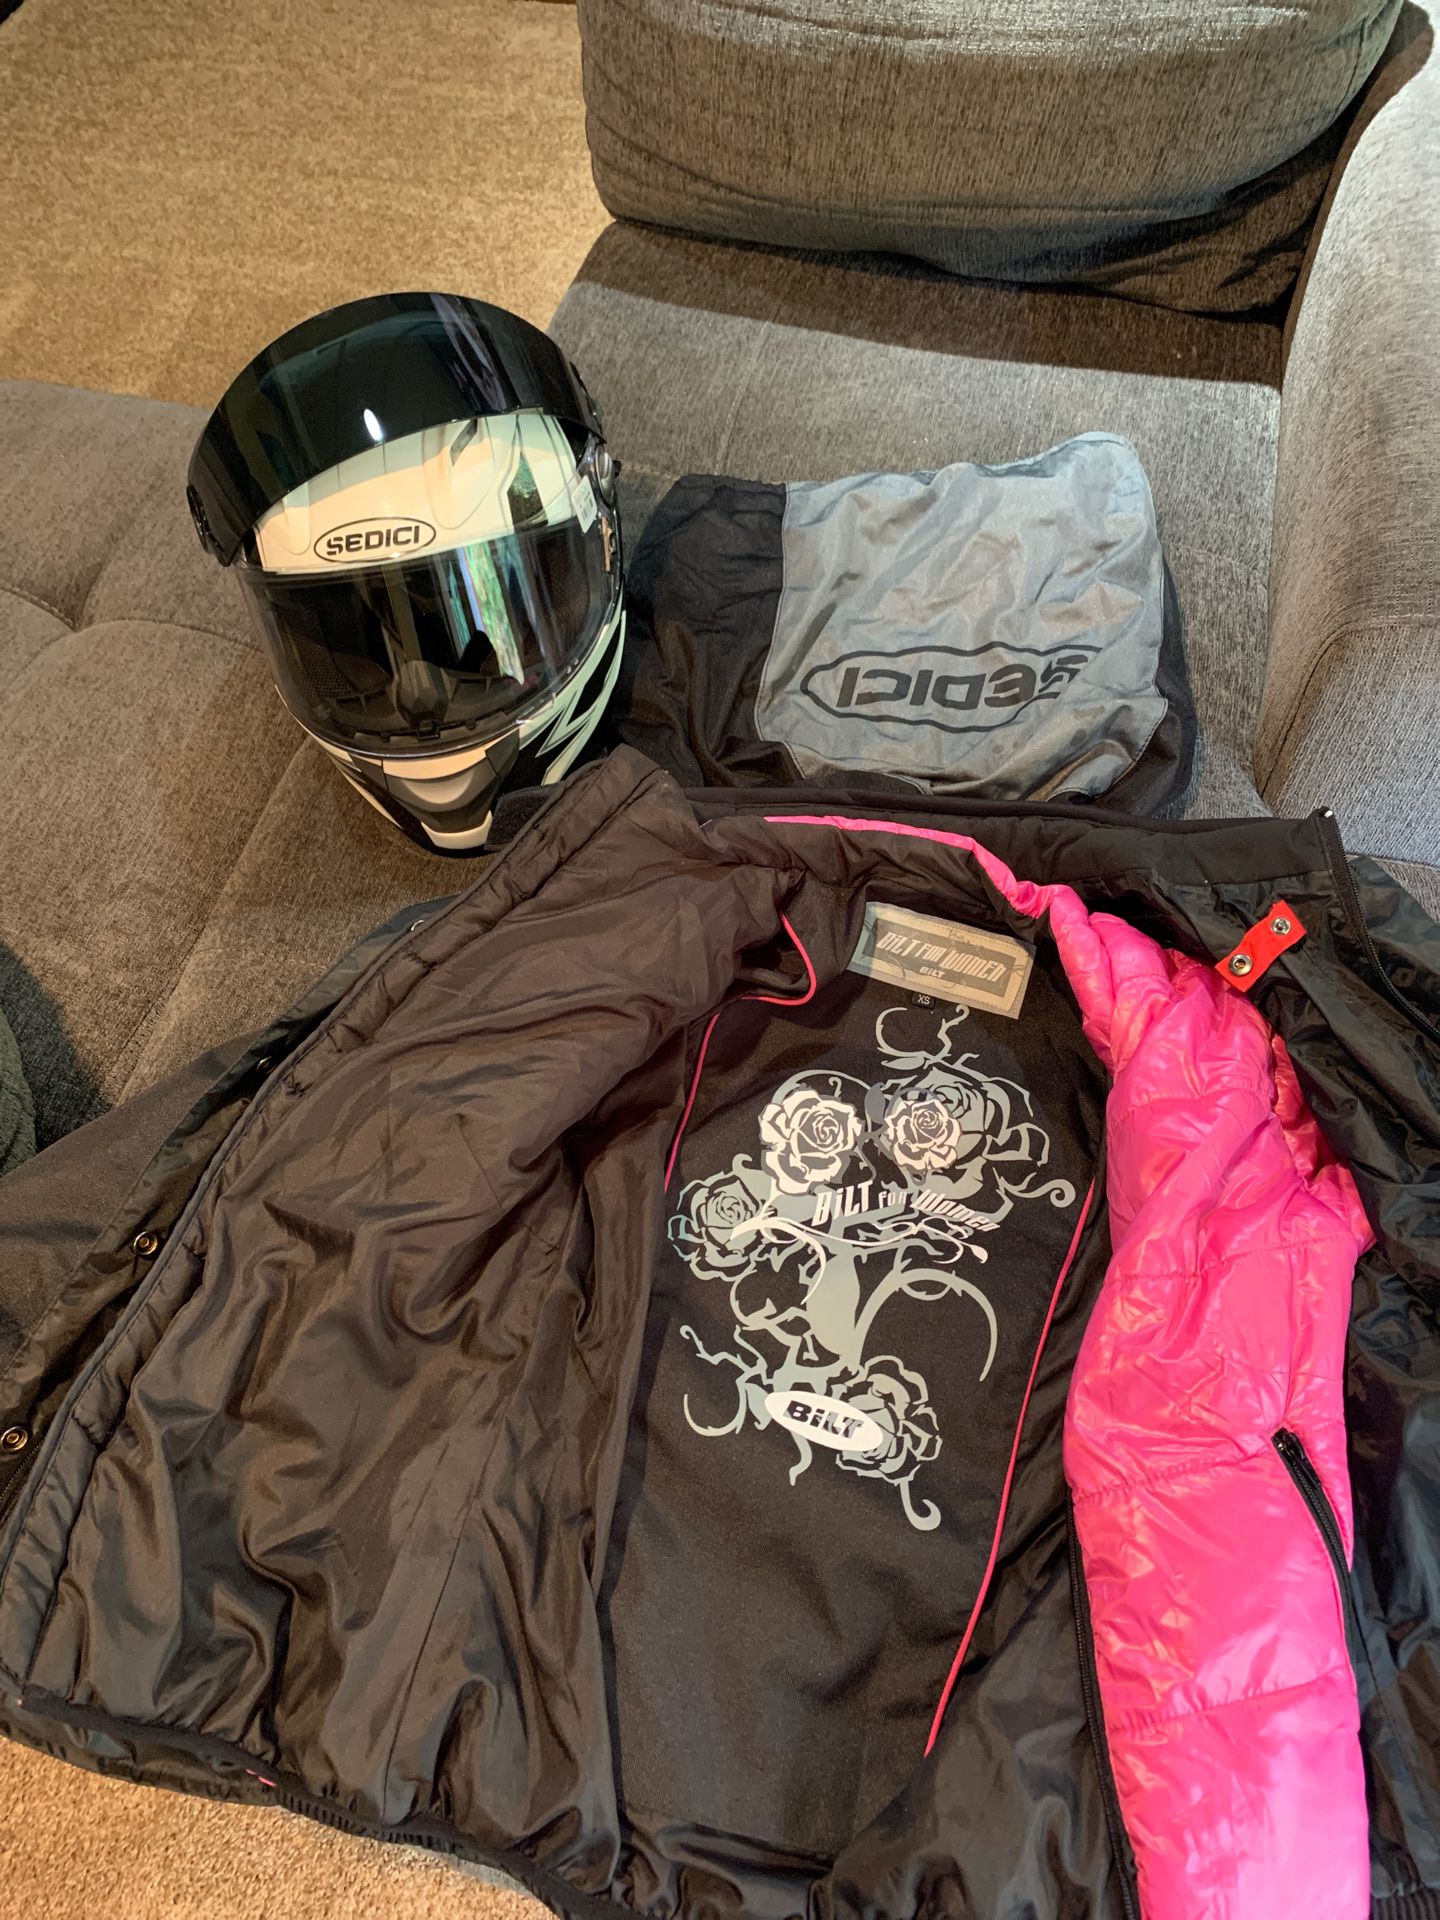 Female motorcycle riding gear